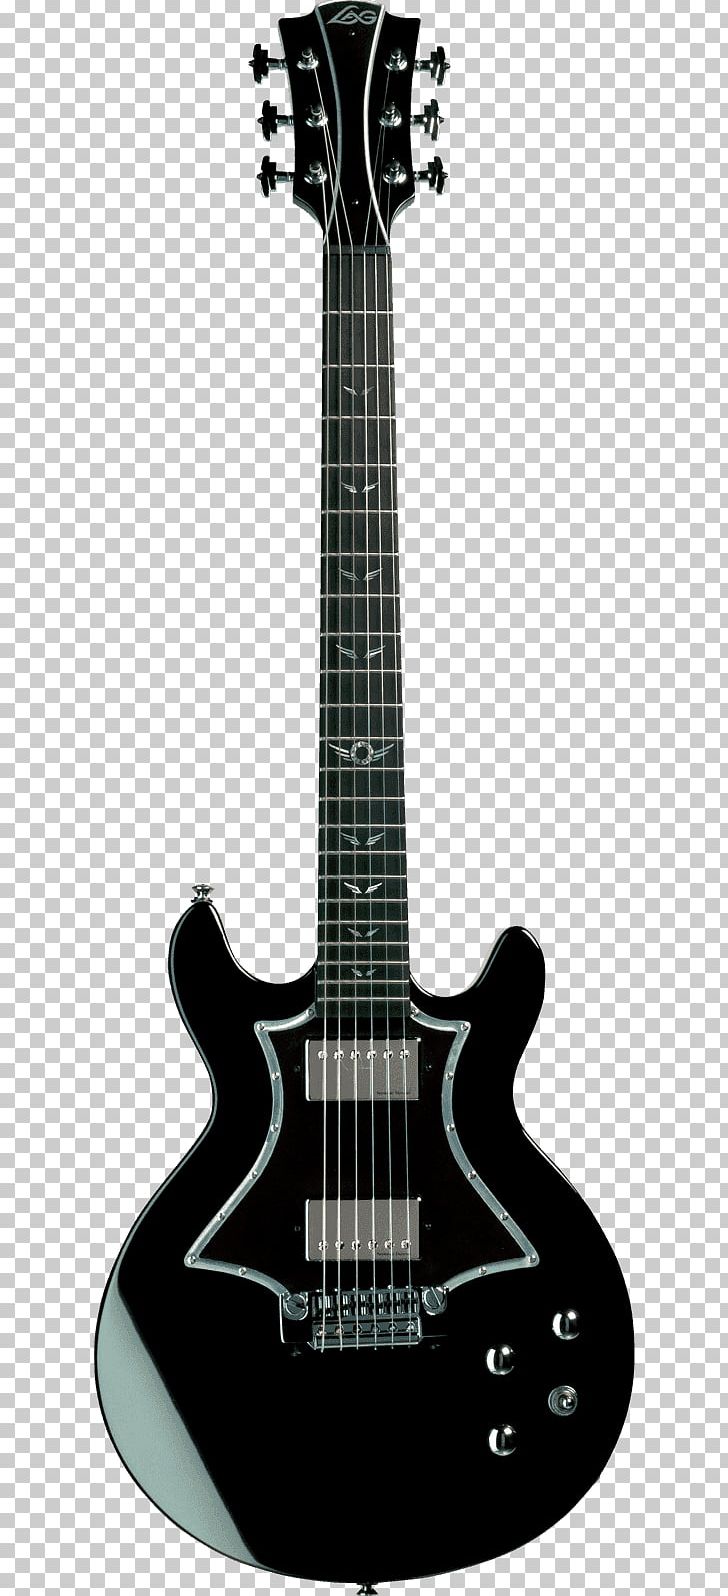 PRS Guitars Schecter Guitar Research Electric Guitar Sunburst PNG, Clipart, Acoustic Electric Guitar, Archtop Guitar, Objects, Plucked String Instruments, Prs Guitars Free PNG Download